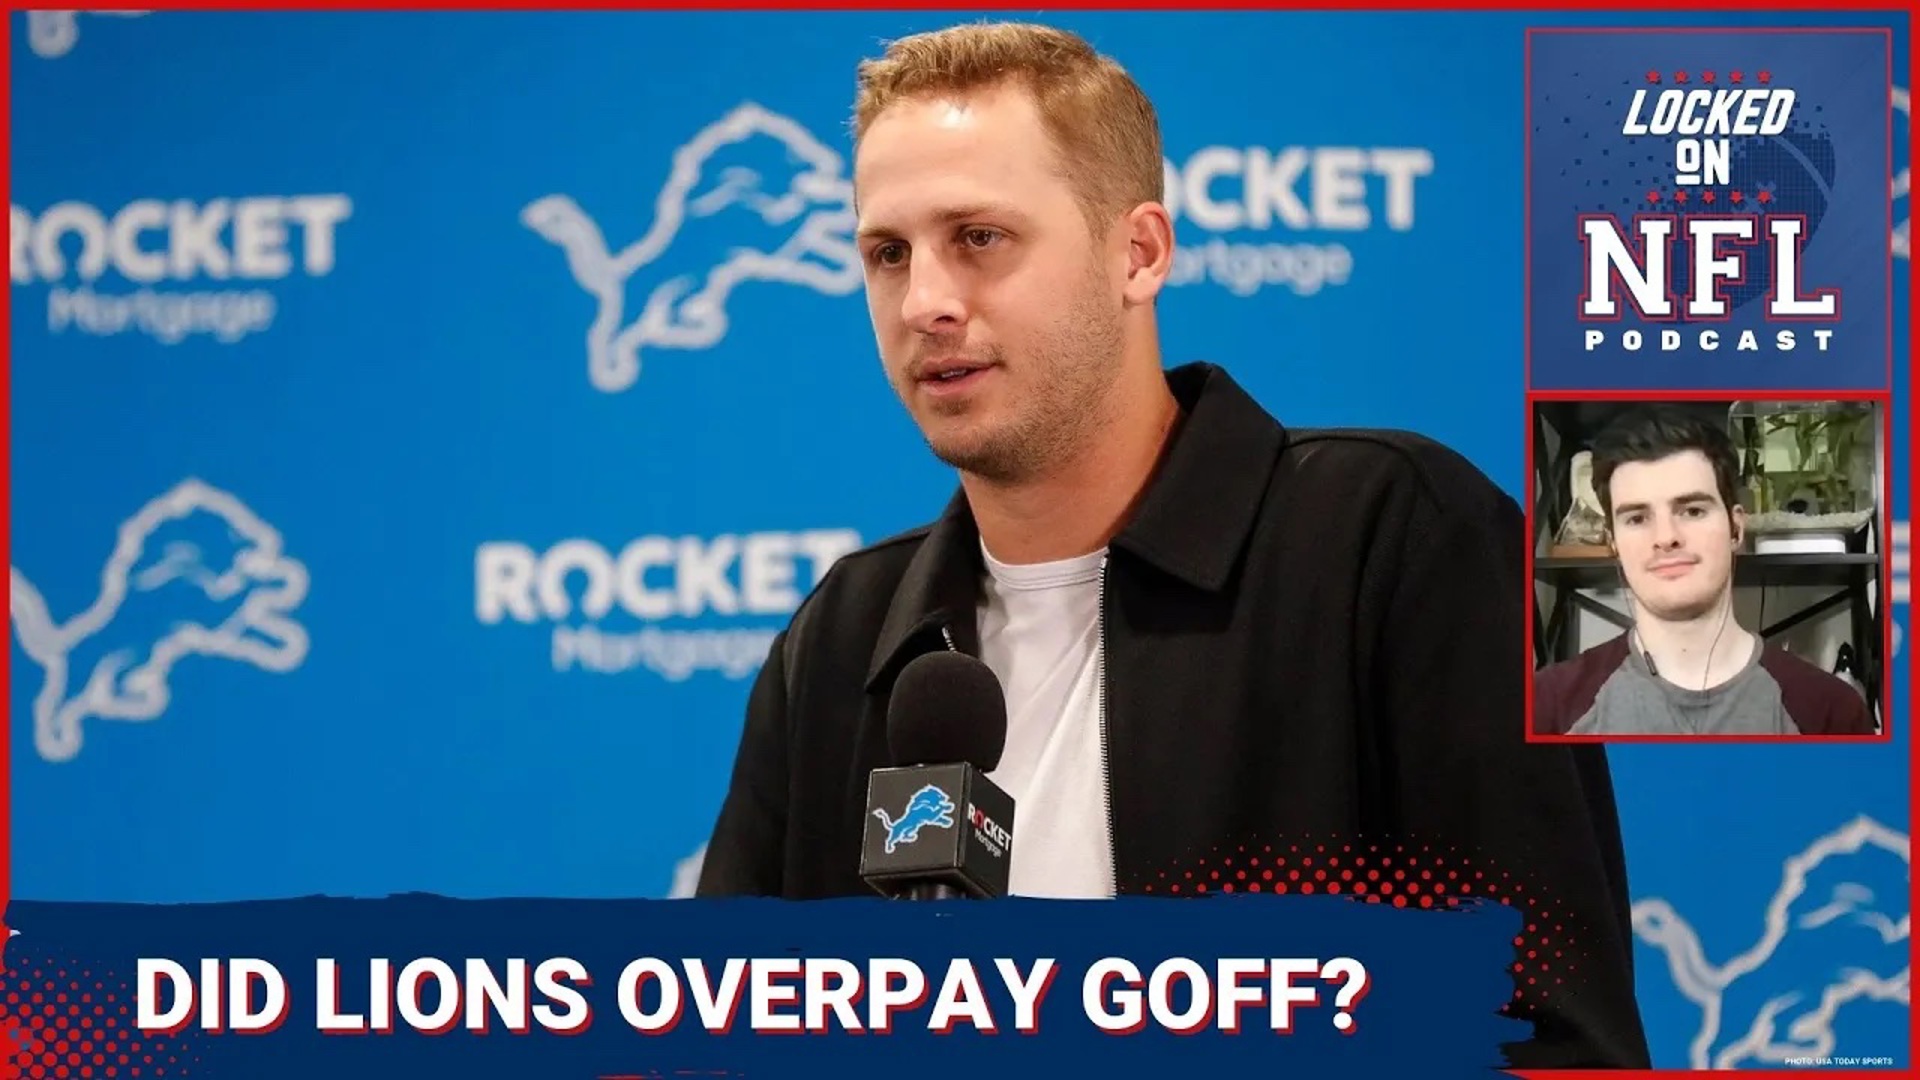 We look at if the Detroit Lions overpaid Jared Goff, what's going on with Cam Heyward and the Pittsburgh Steelers, and the Los Angeles Chargers signing Bud Dupree.